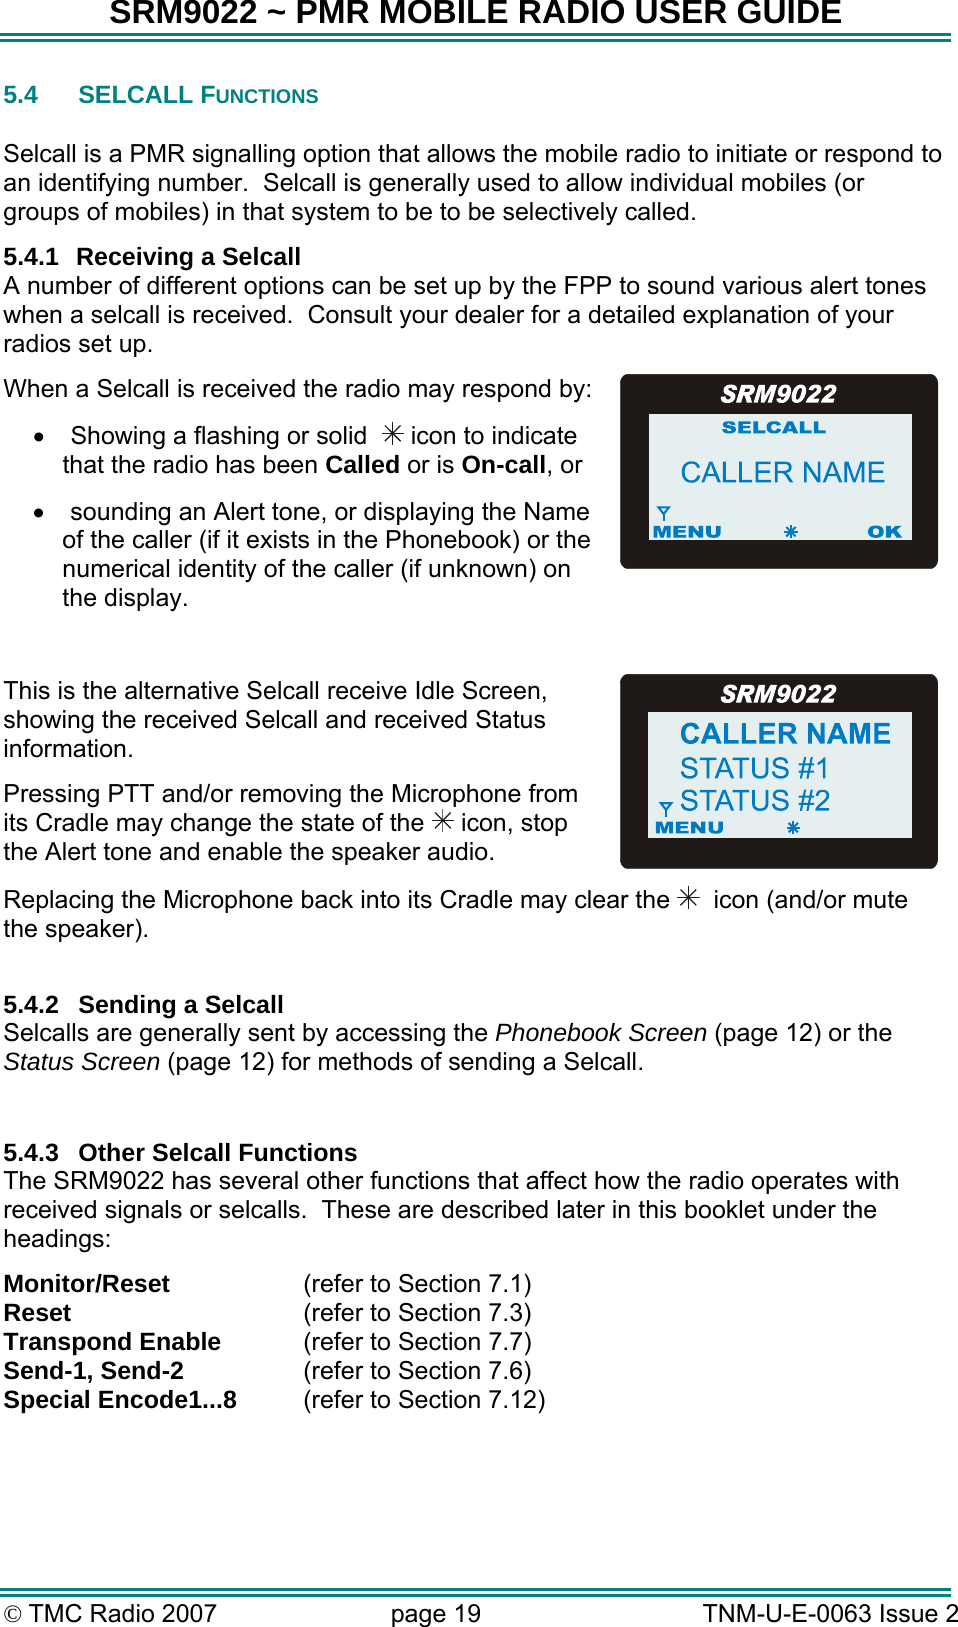 SRM9022 ~ PMR MOBILE RADIO USER GUIDE © TMC Radio 2007  page 19   TNM-U-E-0063 Issue 2 5.4 SELCALL FUNCTIONS  Selcall is a PMR signalling option that allows the mobile radio to initiate or respond to an identifying number.  Selcall is generally used to allow individual mobiles (or groups of mobiles) in that system to be to be selectively called. 5.4.1  Receiving a Selcall A number of different options can be set up by the FPP to sound various alert tones when a selcall is received.  Consult your dealer for a detailed explanation of your radios set up. When a Selcall is received the radio may respond by: •  Showing a flashing or solid    icon to indicate that the radio has been Called or is On-call, or •  sounding an Alert tone, or displaying the Name of the caller (if it exists in the Phonebook) or the numerical identity of the caller (if unknown) on the display.  This is the alternative Selcall receive Idle Screen, showing the received Selcall and received Status information.  Pressing PTT and/or removing the Microphone from its Cradle may change the state of the   icon, stop the Alert tone and enable the speaker audio. Replacing the Microphone back into its Cradle may clear the    icon (and/or mute the speaker).  5.4.2  Sending a Selcall Selcalls are generally sent by accessing the Phonebook Screen (page 12) or the Status Screen (page 12) for methods of sending a Selcall.  5.4.3  Other Selcall Functions The SRM9022 has several other functions that affect how the radio operates with received signals or selcalls.  These are described later in this booklet under the headings: Monitor/Reset  (refer to Section 7.1) Reset  (refer to Section 7.3) Transpond Enable   (refer to Section 7.7) Send-1, Send-2  (refer to Section 7.6) Special Encode1...8  (refer to Section 7.12)  